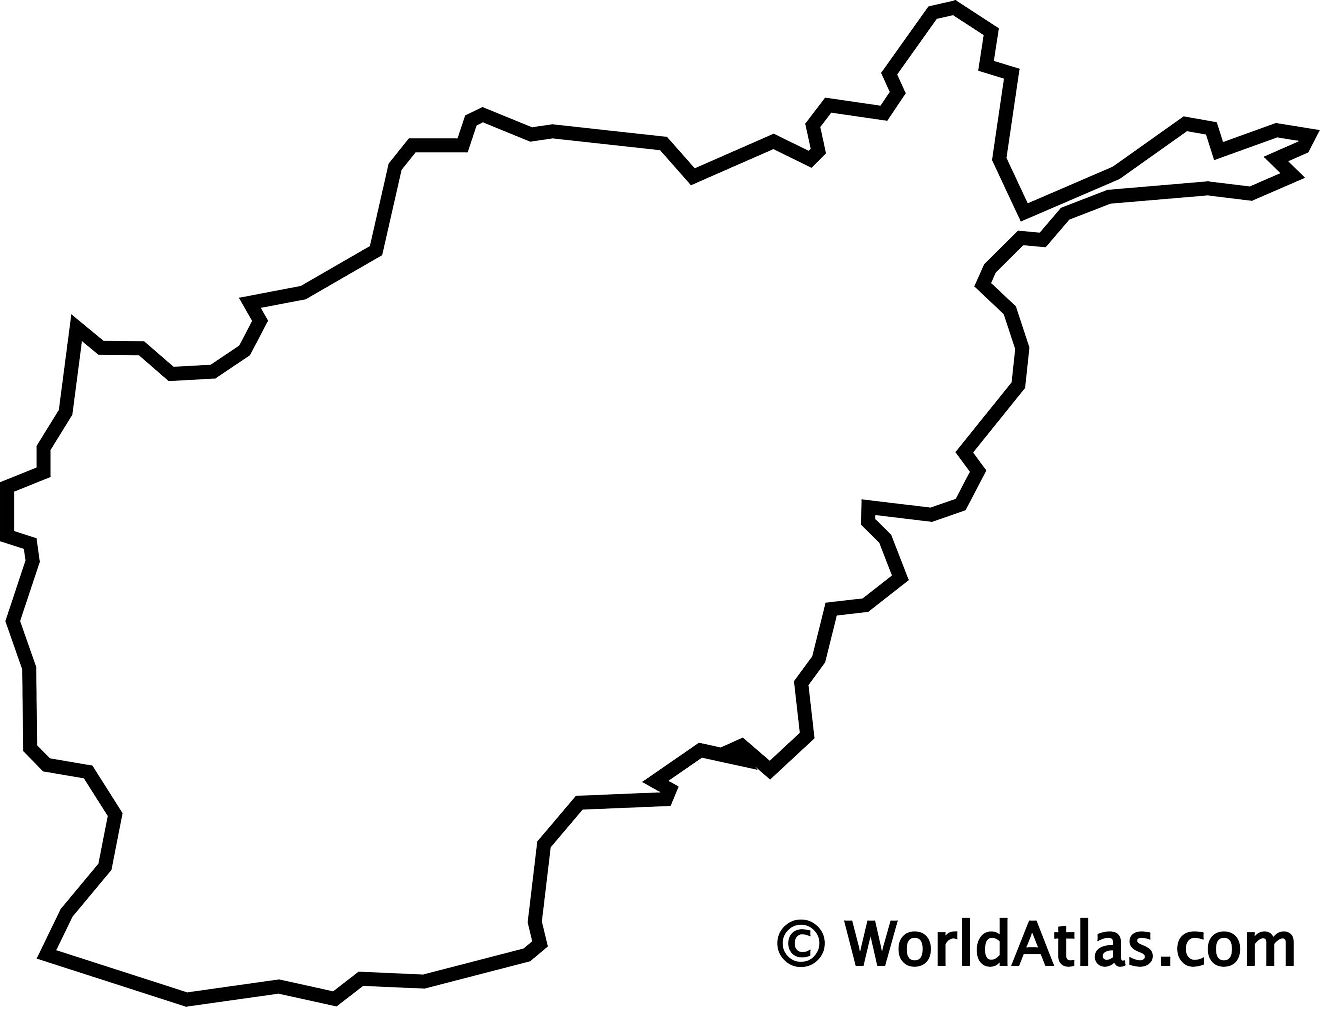 Afghanistan Map Afghanistan Maps Facts World Atlas The Map Shows | My ...